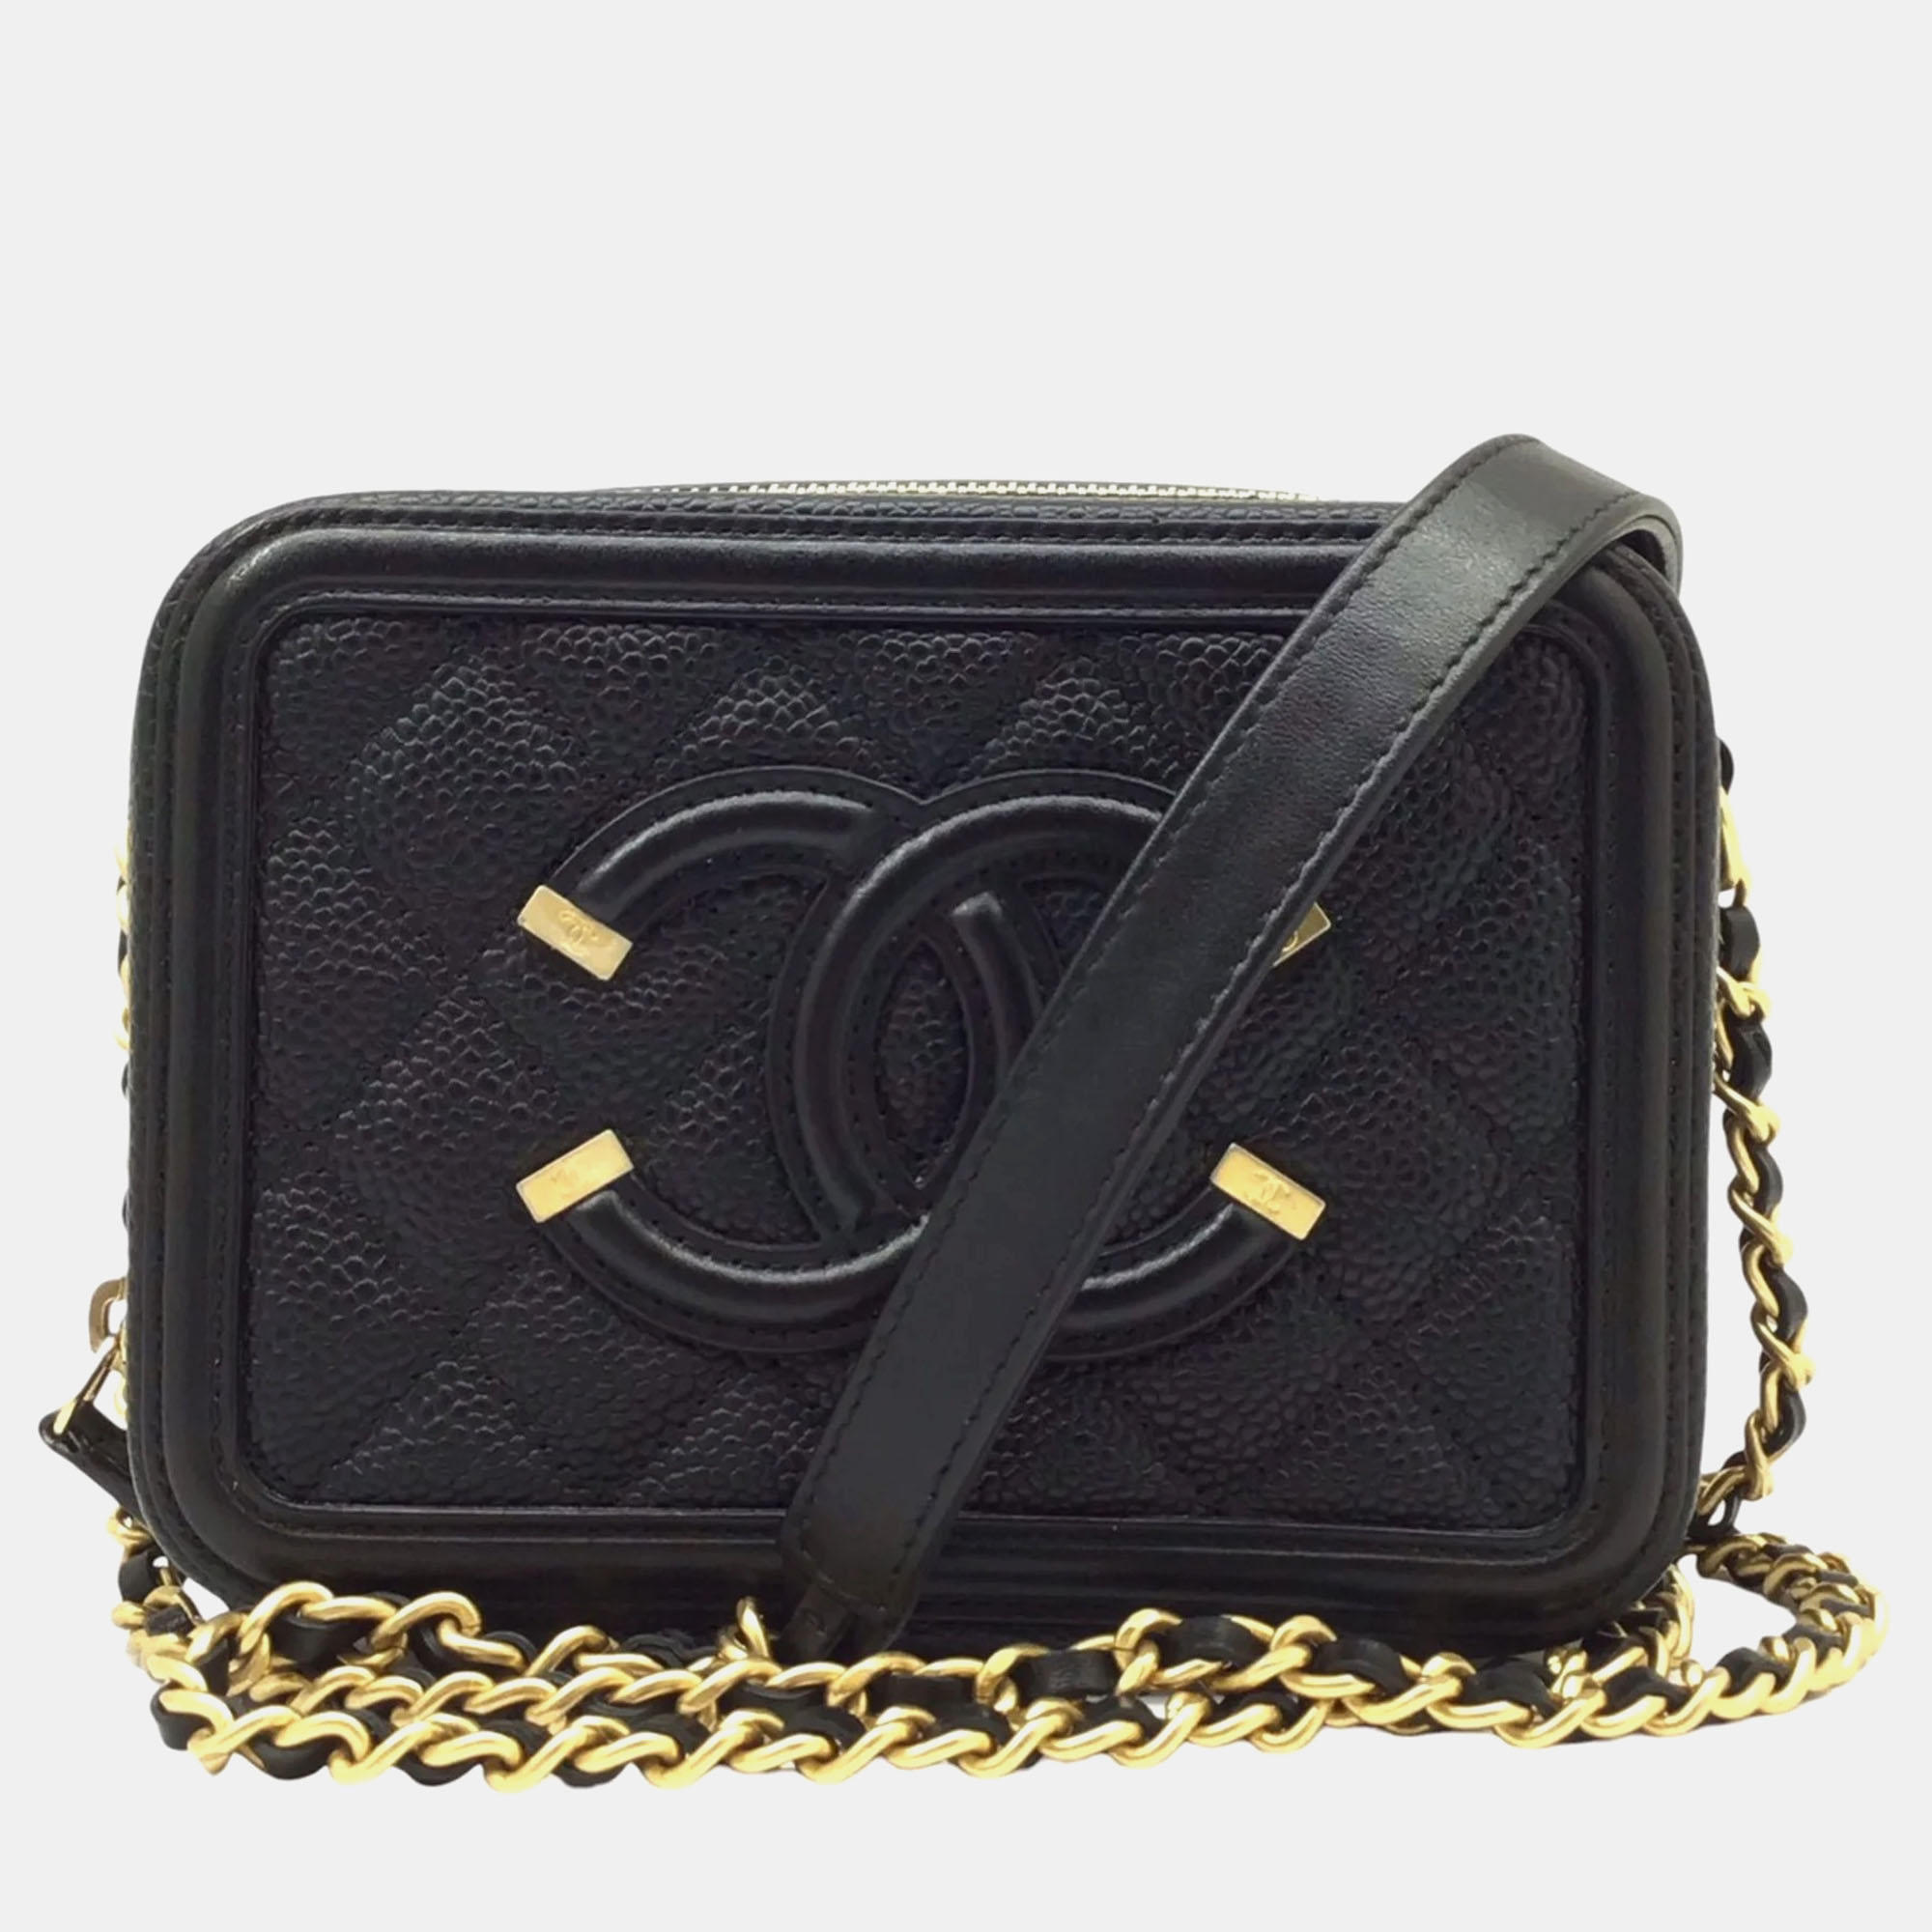 Chanel black leather small filigree shoulder bags